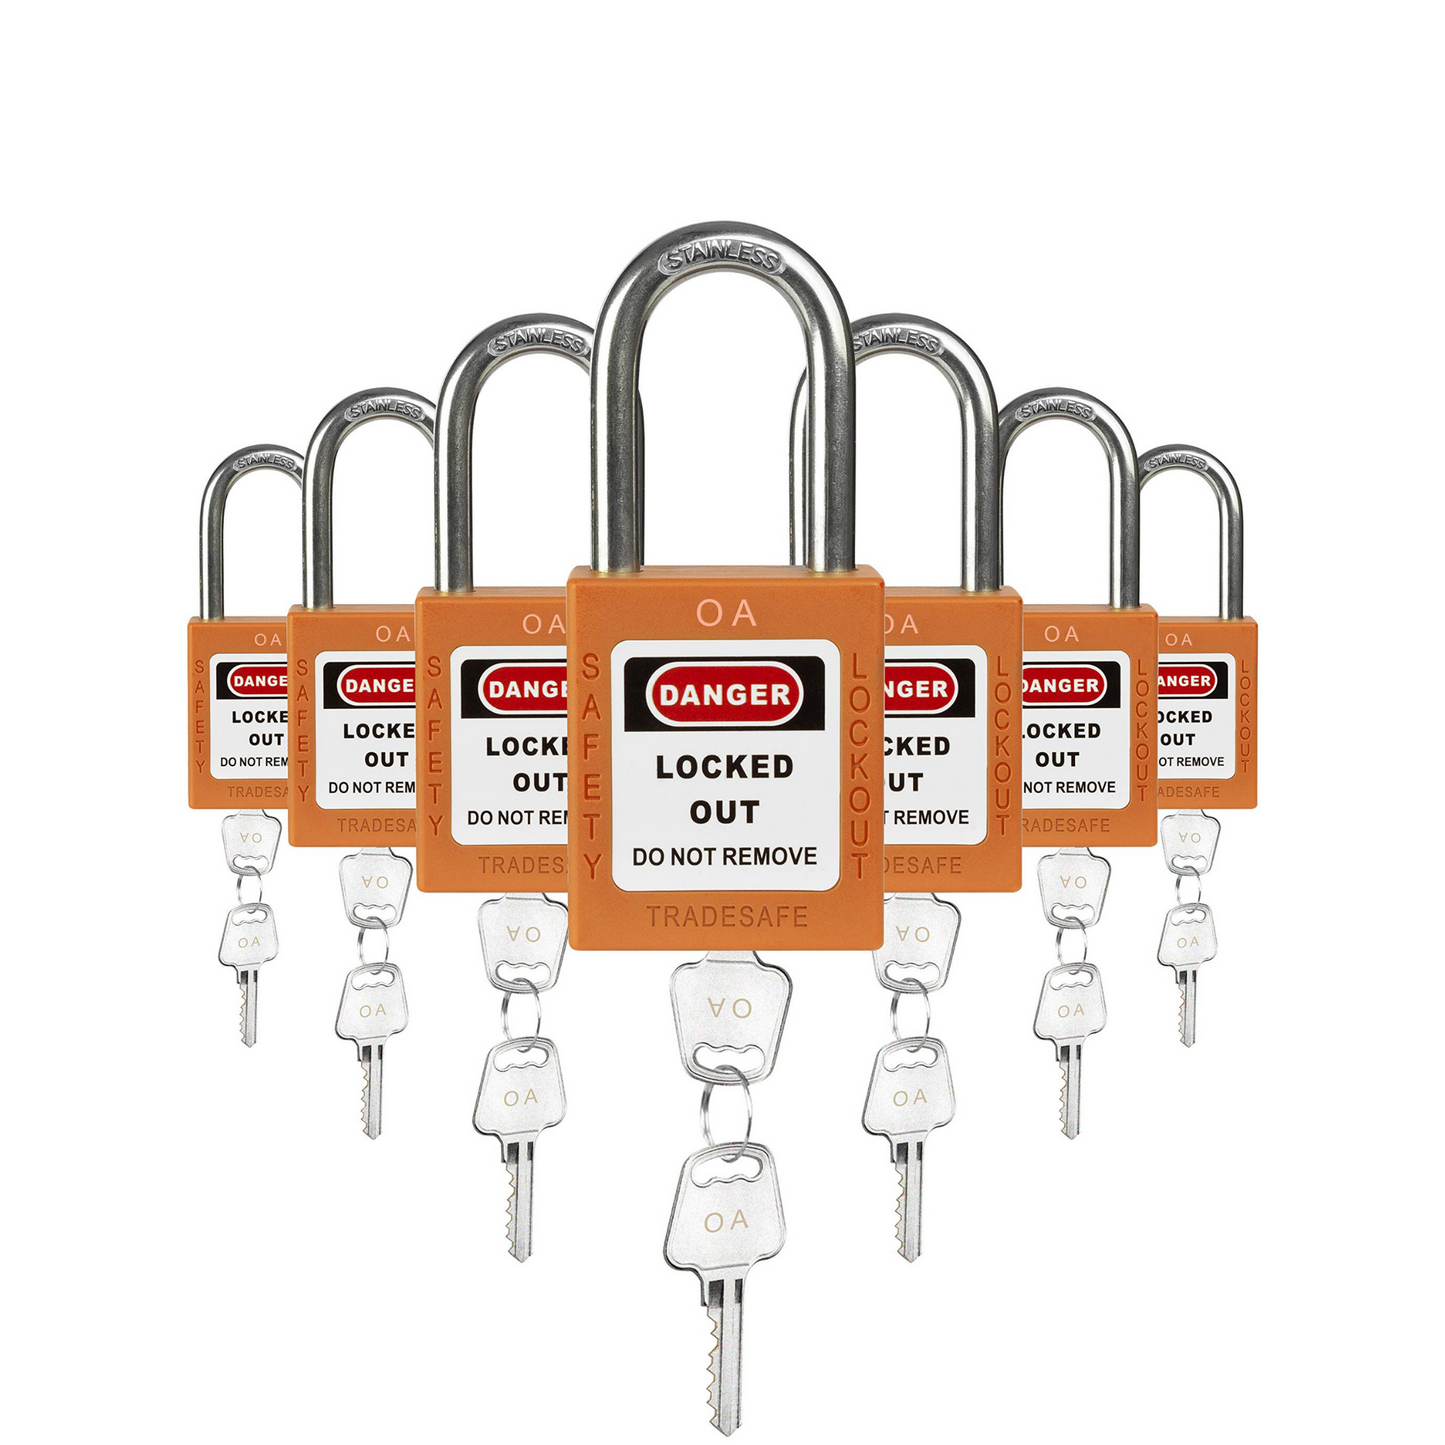 seven orange loto padlocks, each with two keys and a OA letter code on both the lock body and the keys 